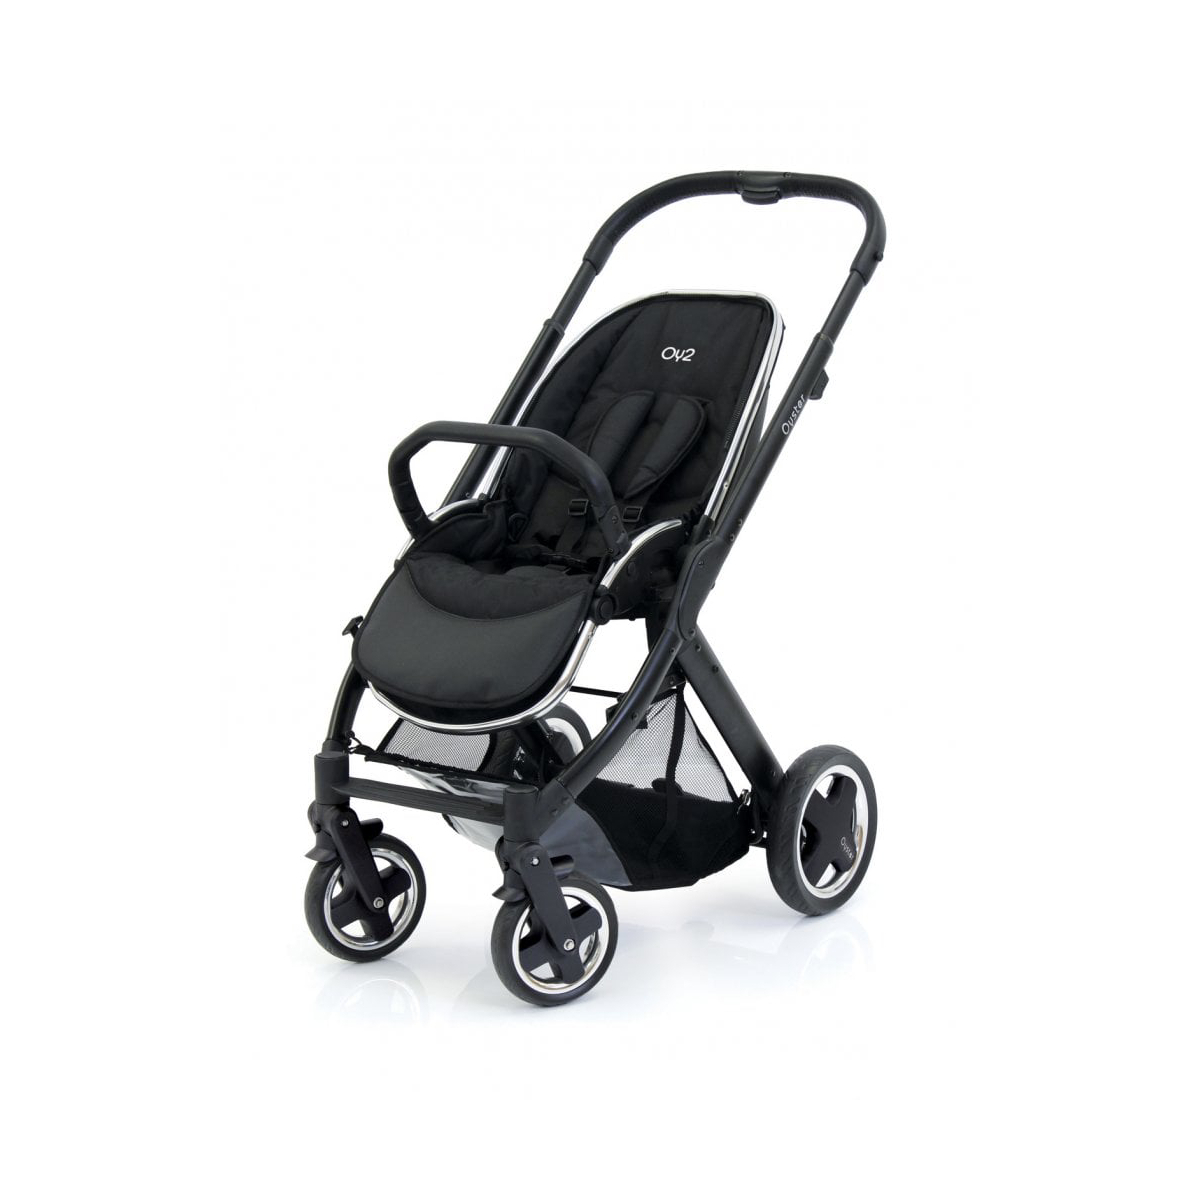 Babystyle Oyster 2 Pushchair Black Chassis and Seat Unit